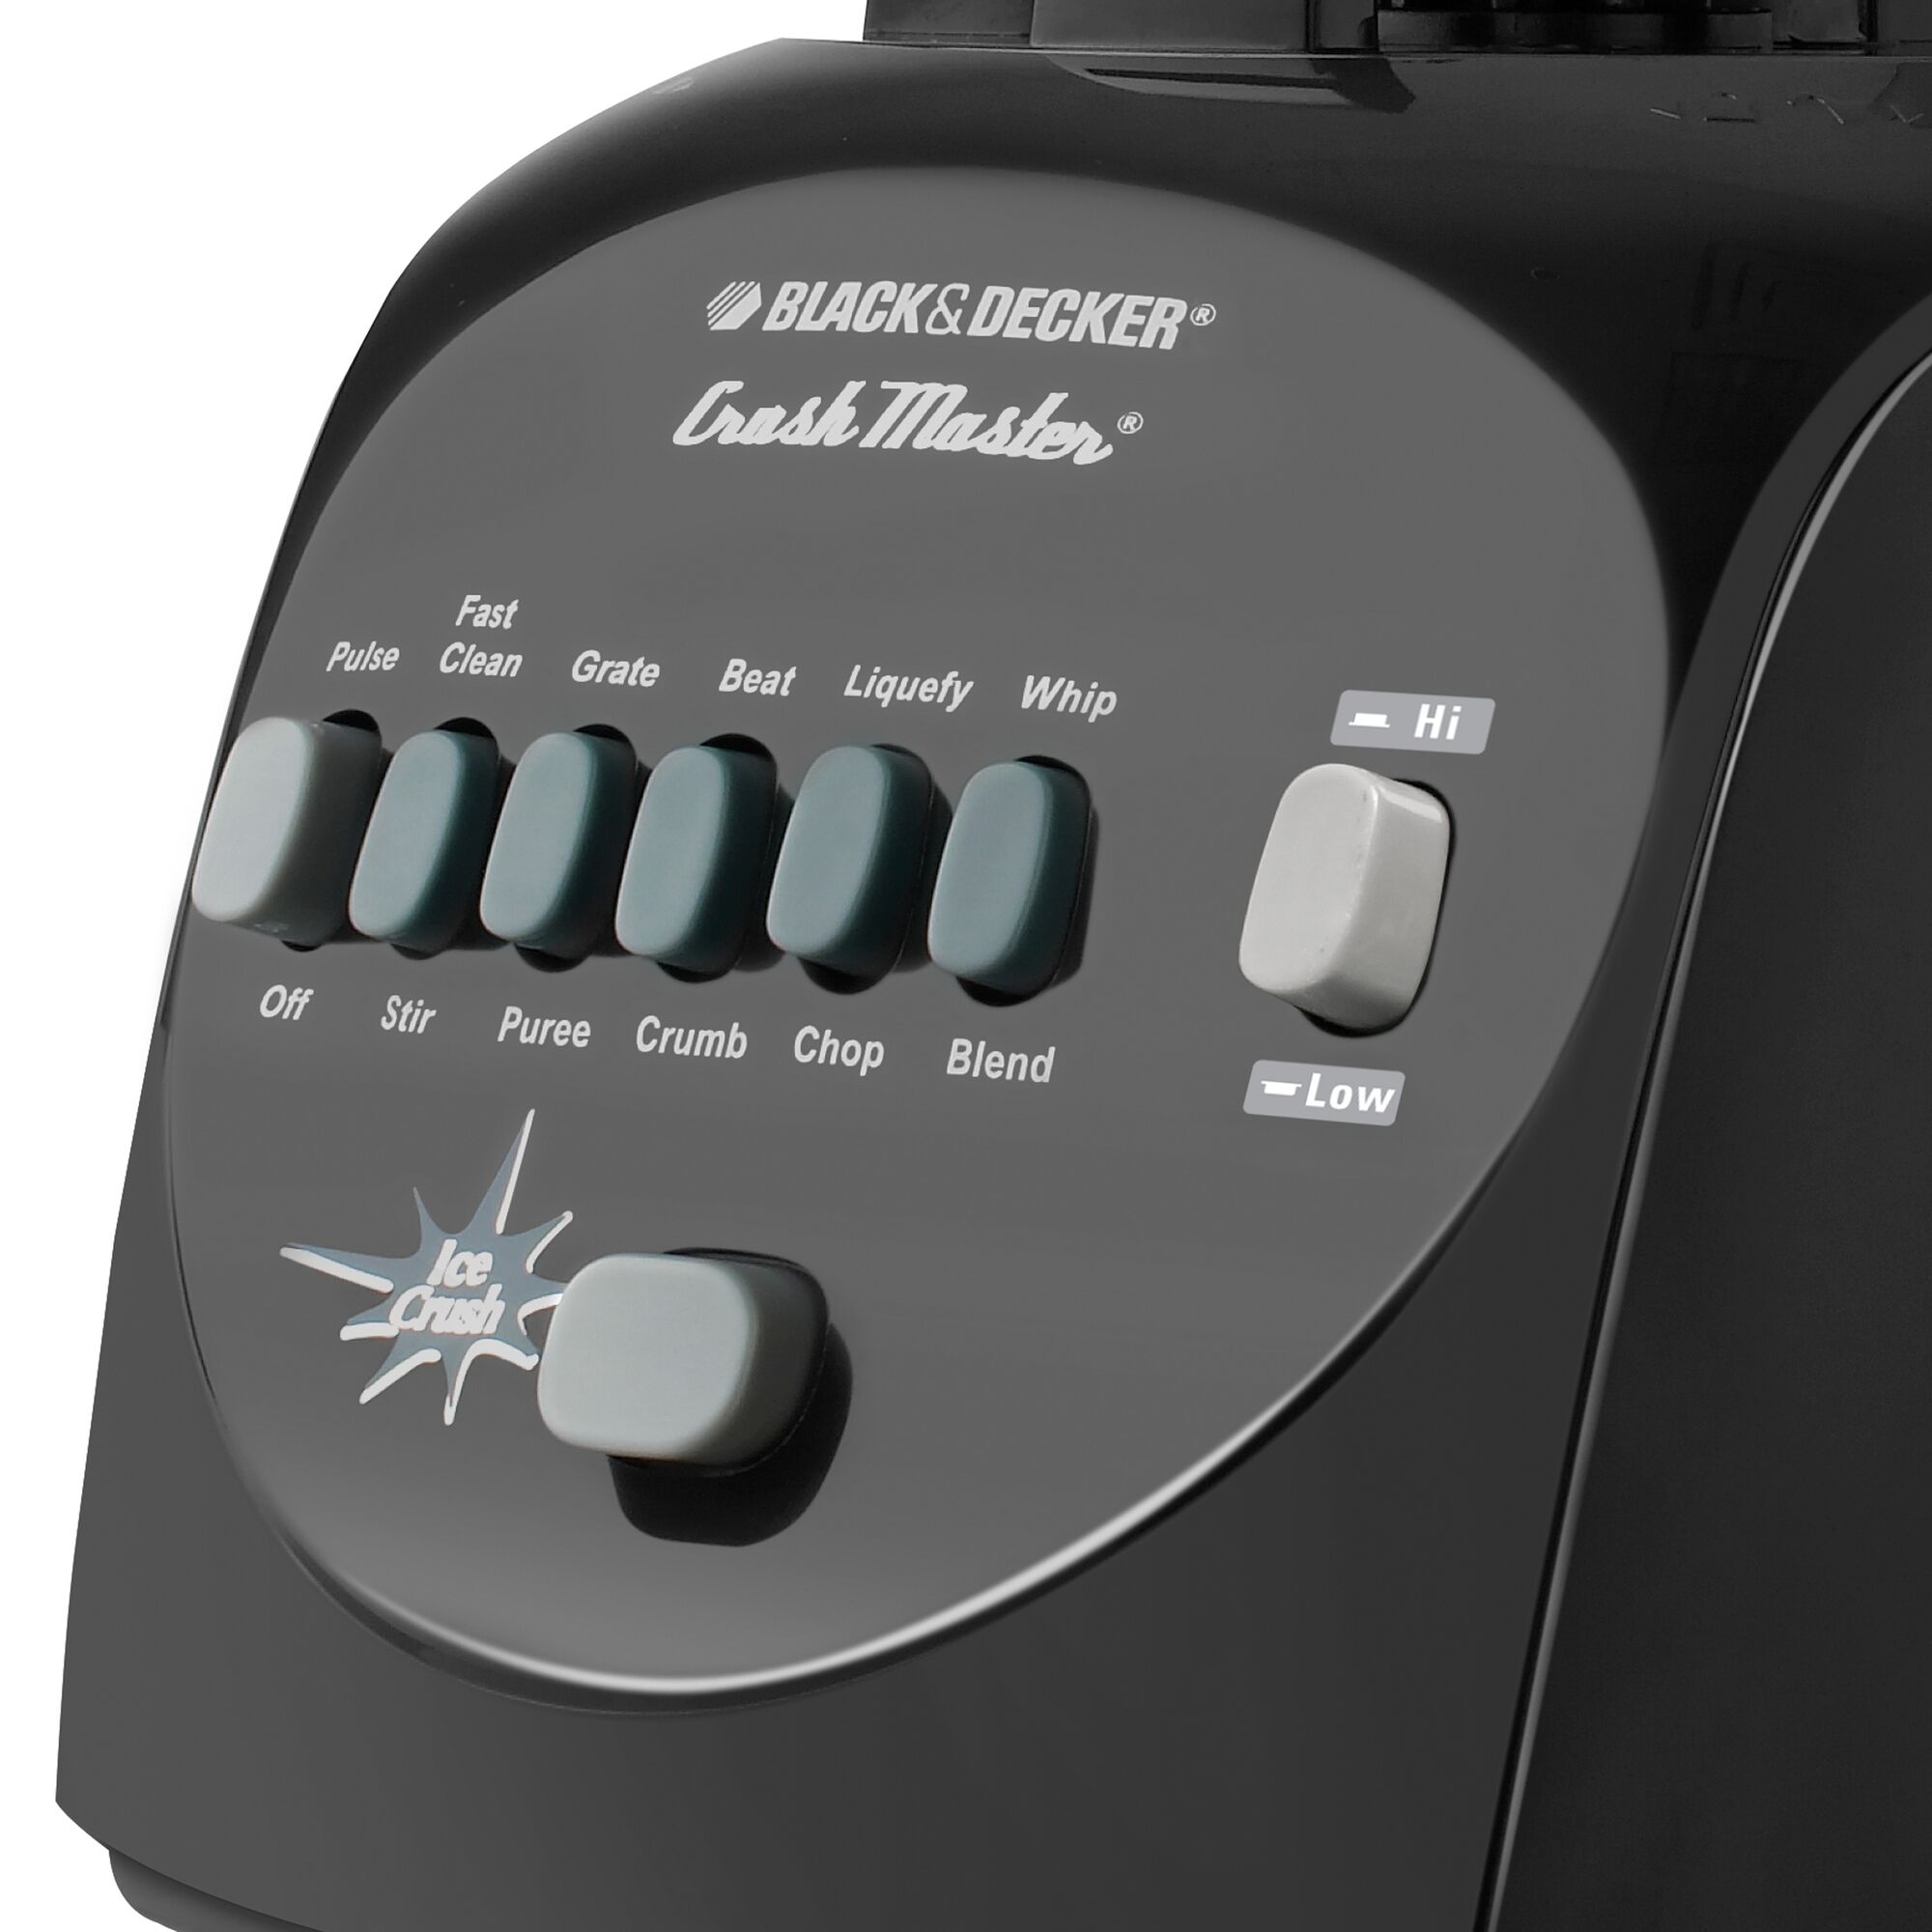 Close-up of push button controls for the BLACK+DECKER 10 Speed Blender